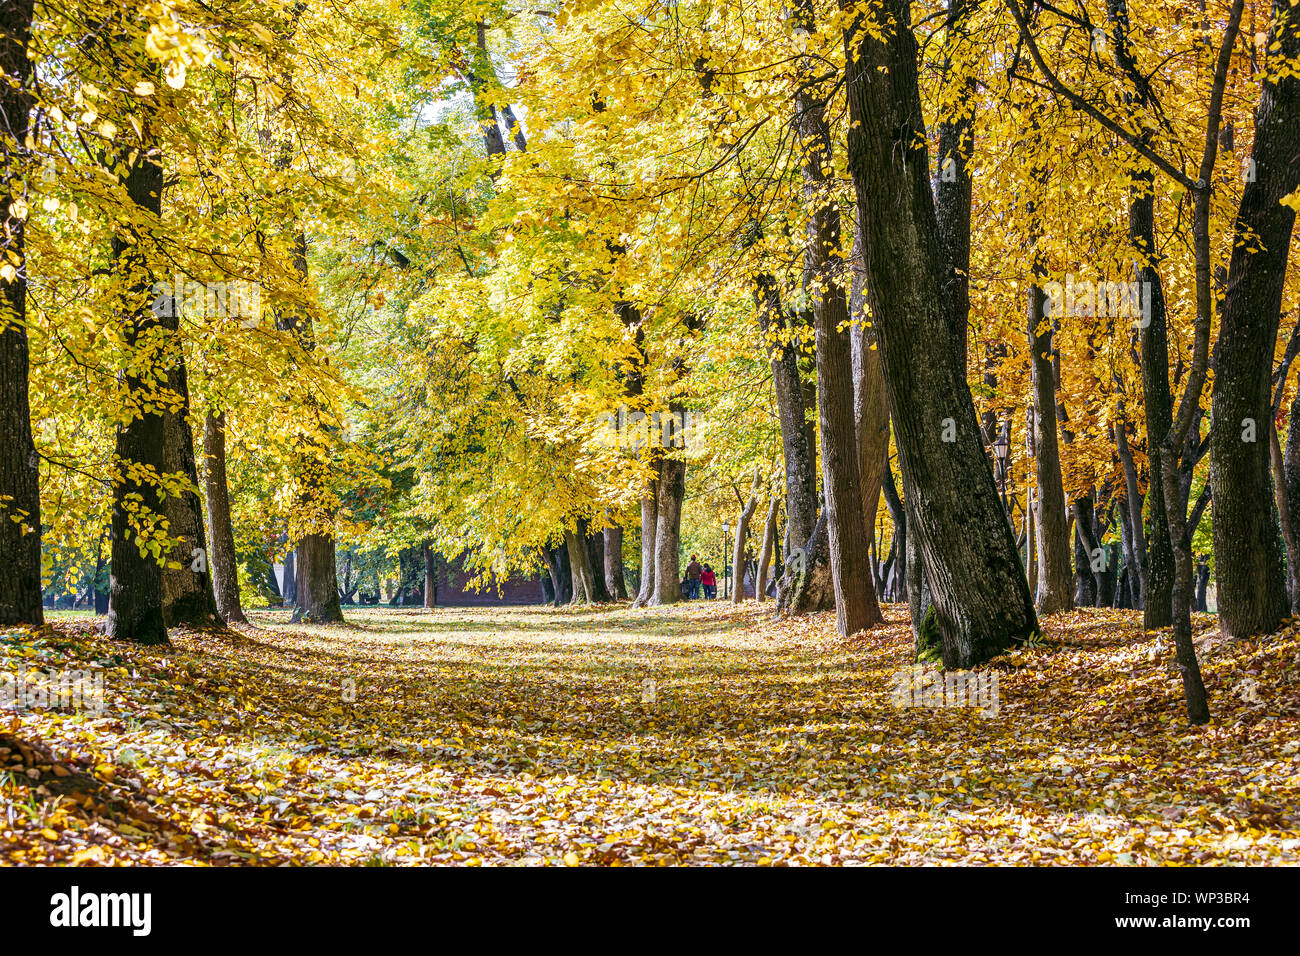 beautiful autumnal park scene. park trees with yellow leaves, ground covered with fallen dry foliage Stock Photo